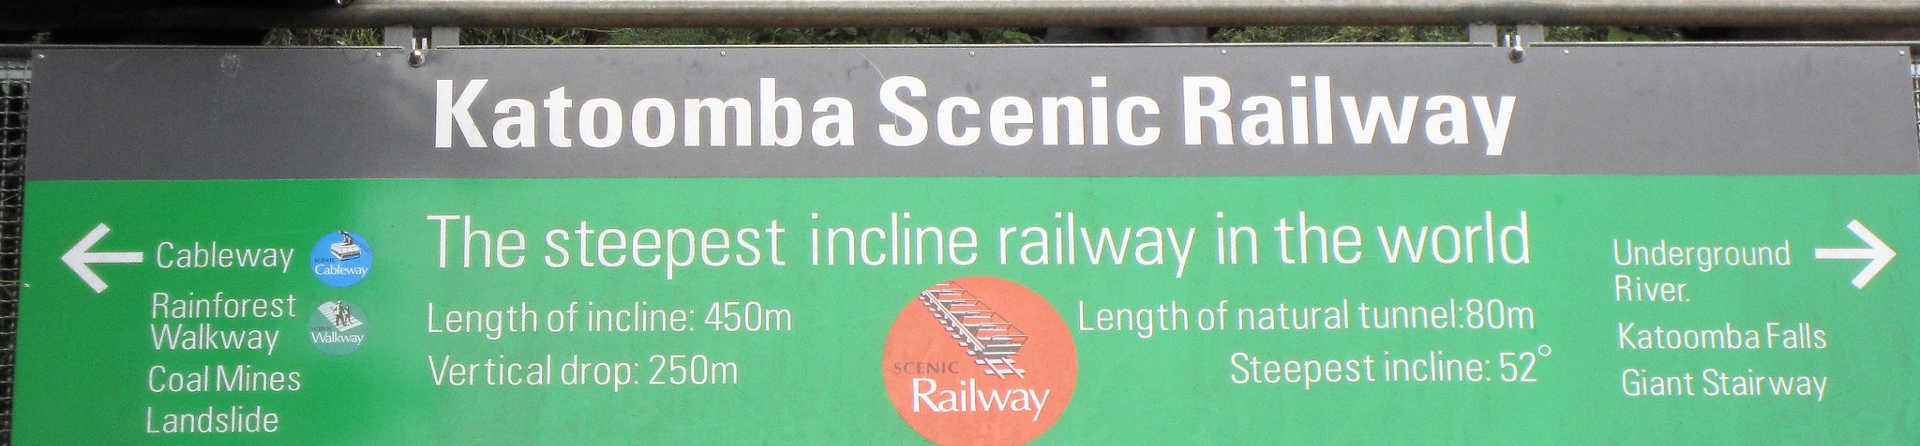 How long is the Scenic Railway?